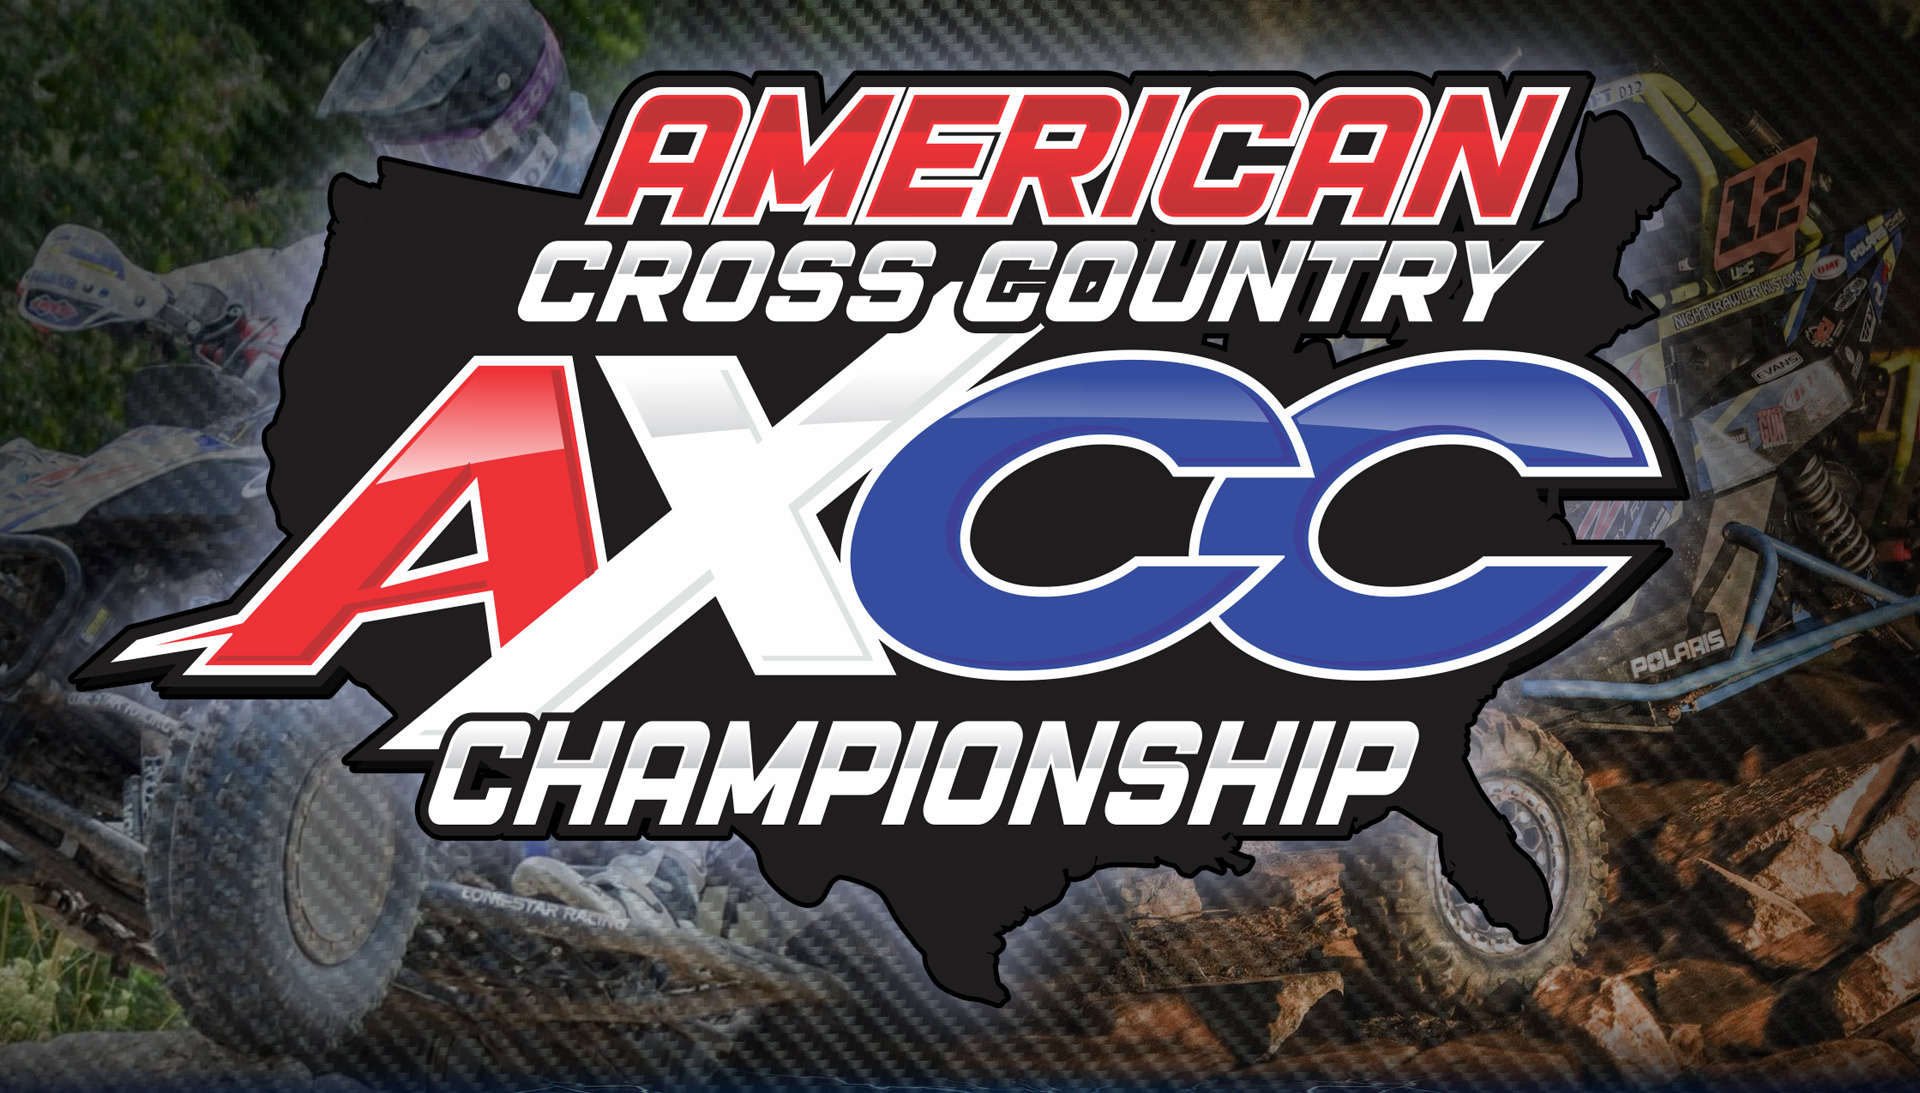 AXCC American Cross Country Championship